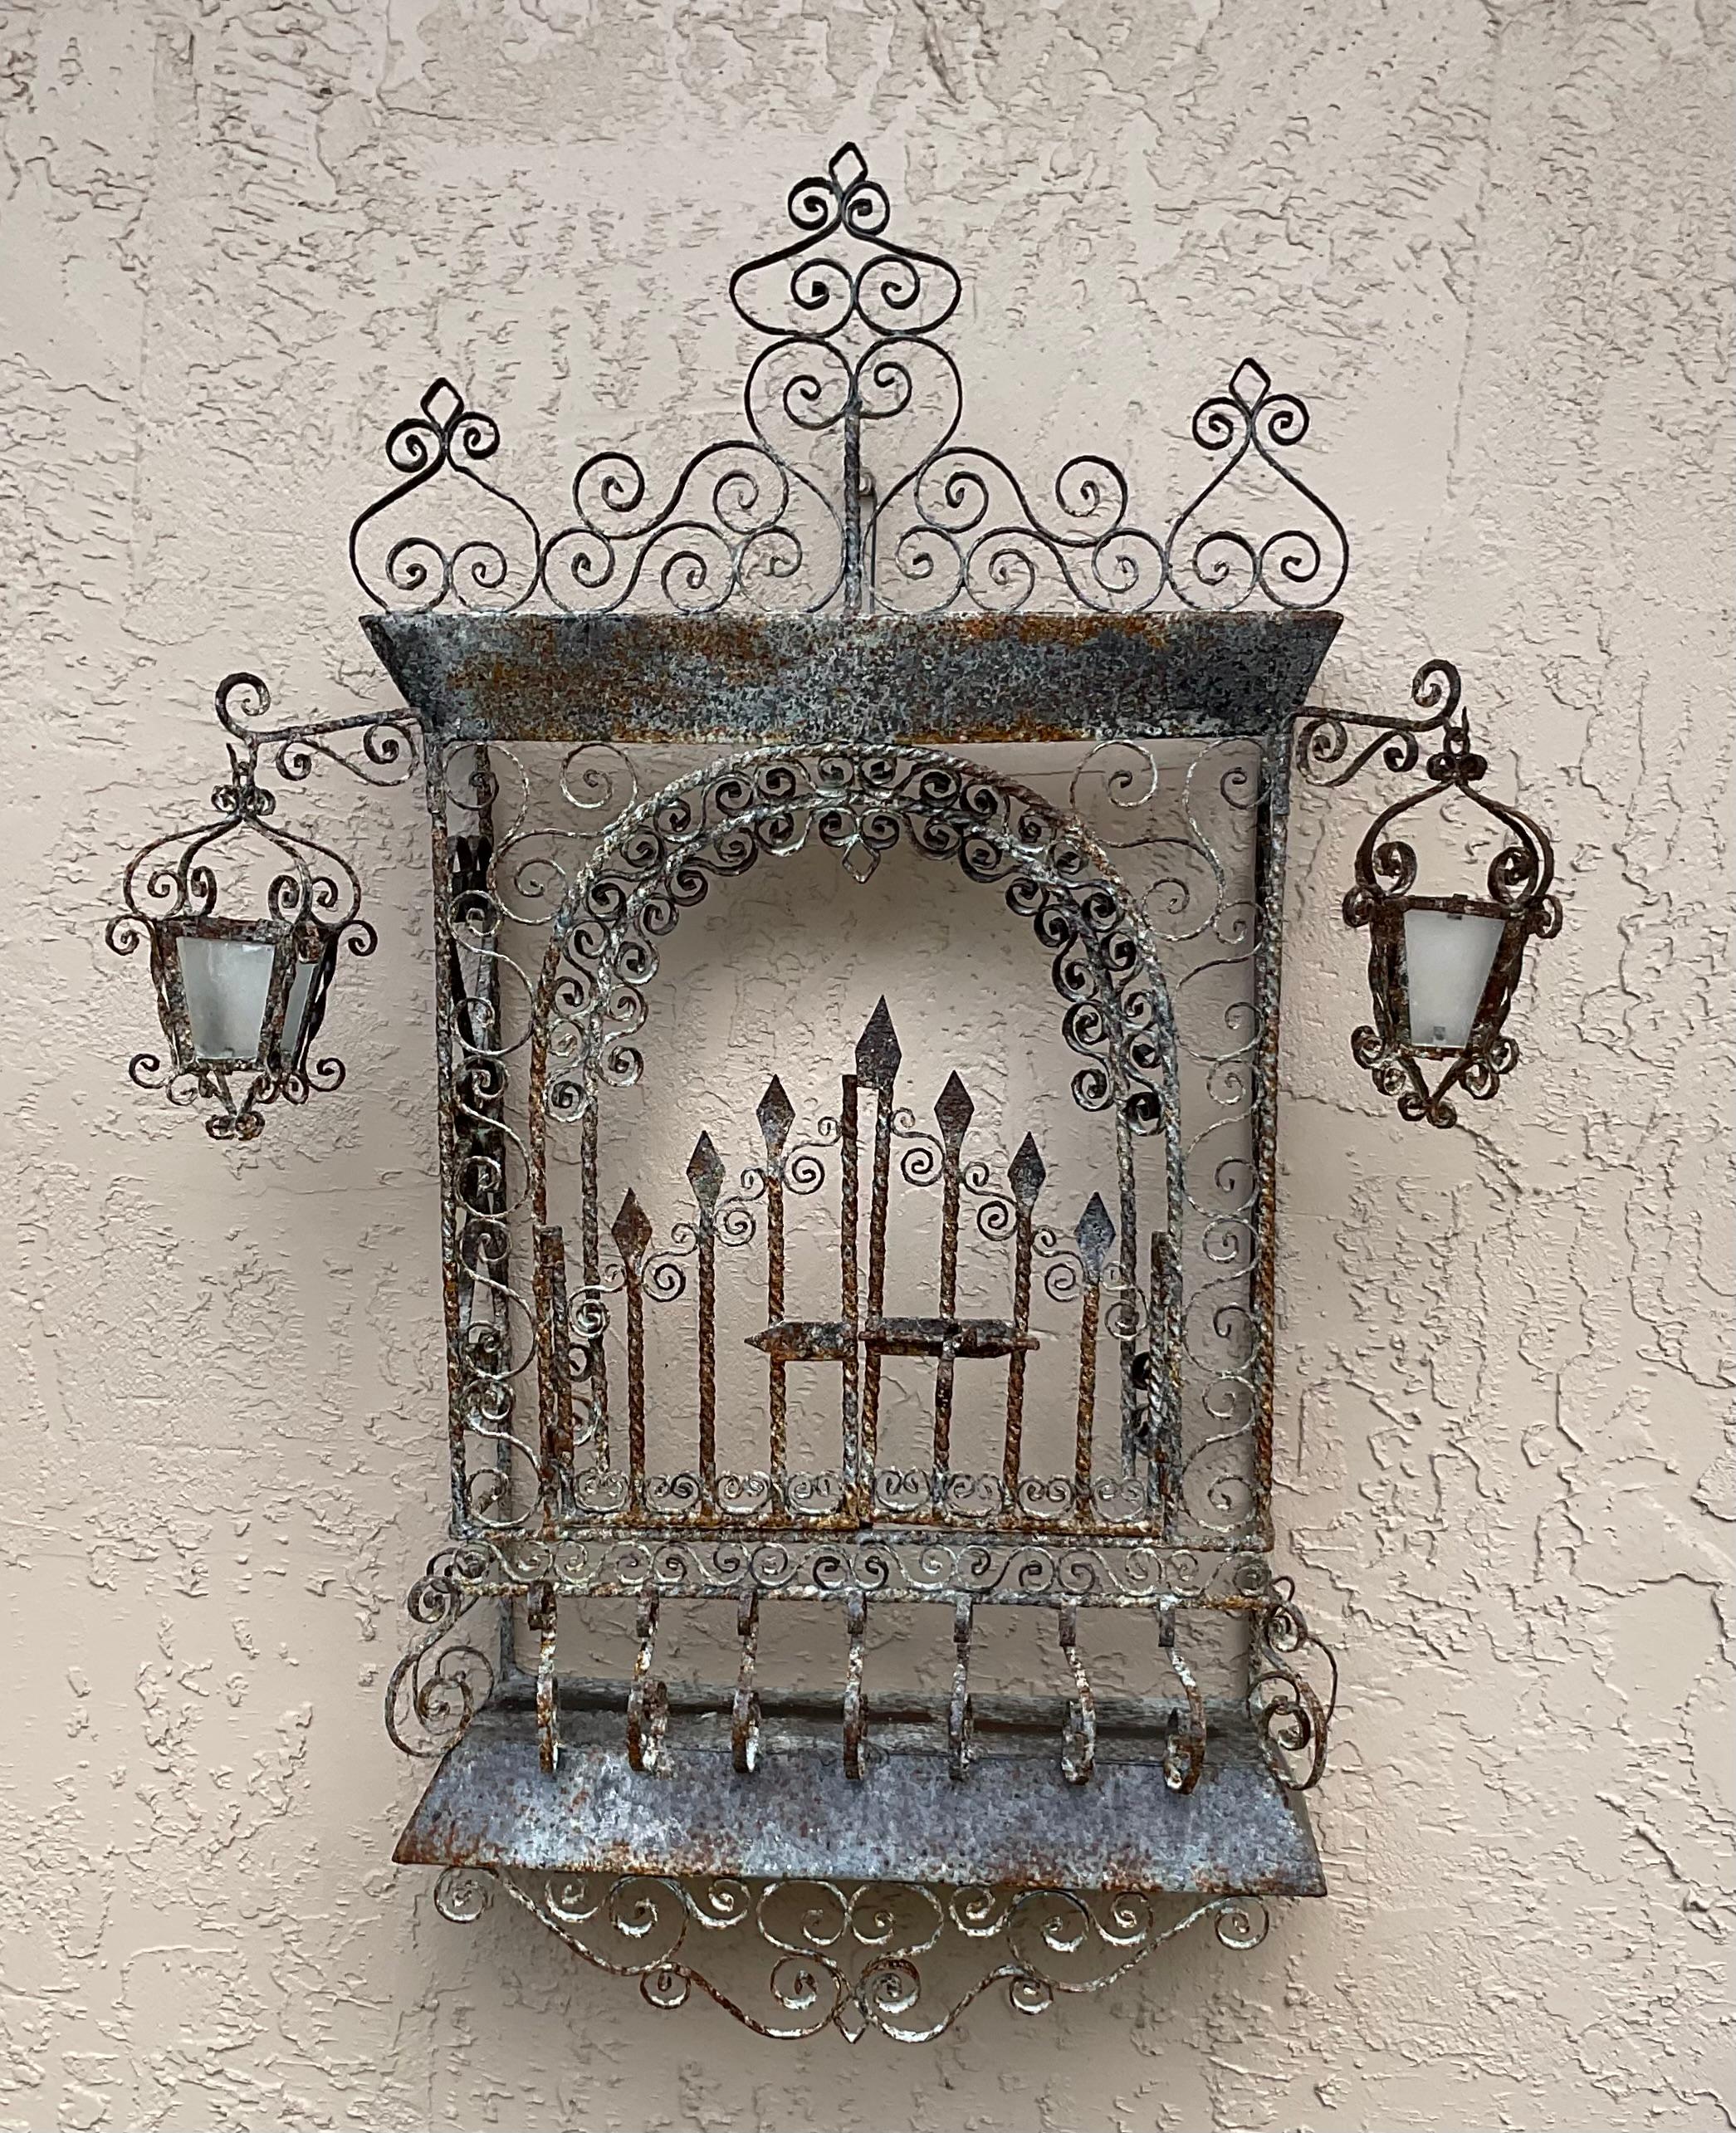 Funky sampler wall hanging ,of hand forged iron gate probably made before making the actual gate , great mastery of hand forged sampler to hang on the wall as decorative object of art.
Professionally rust prevention treated .